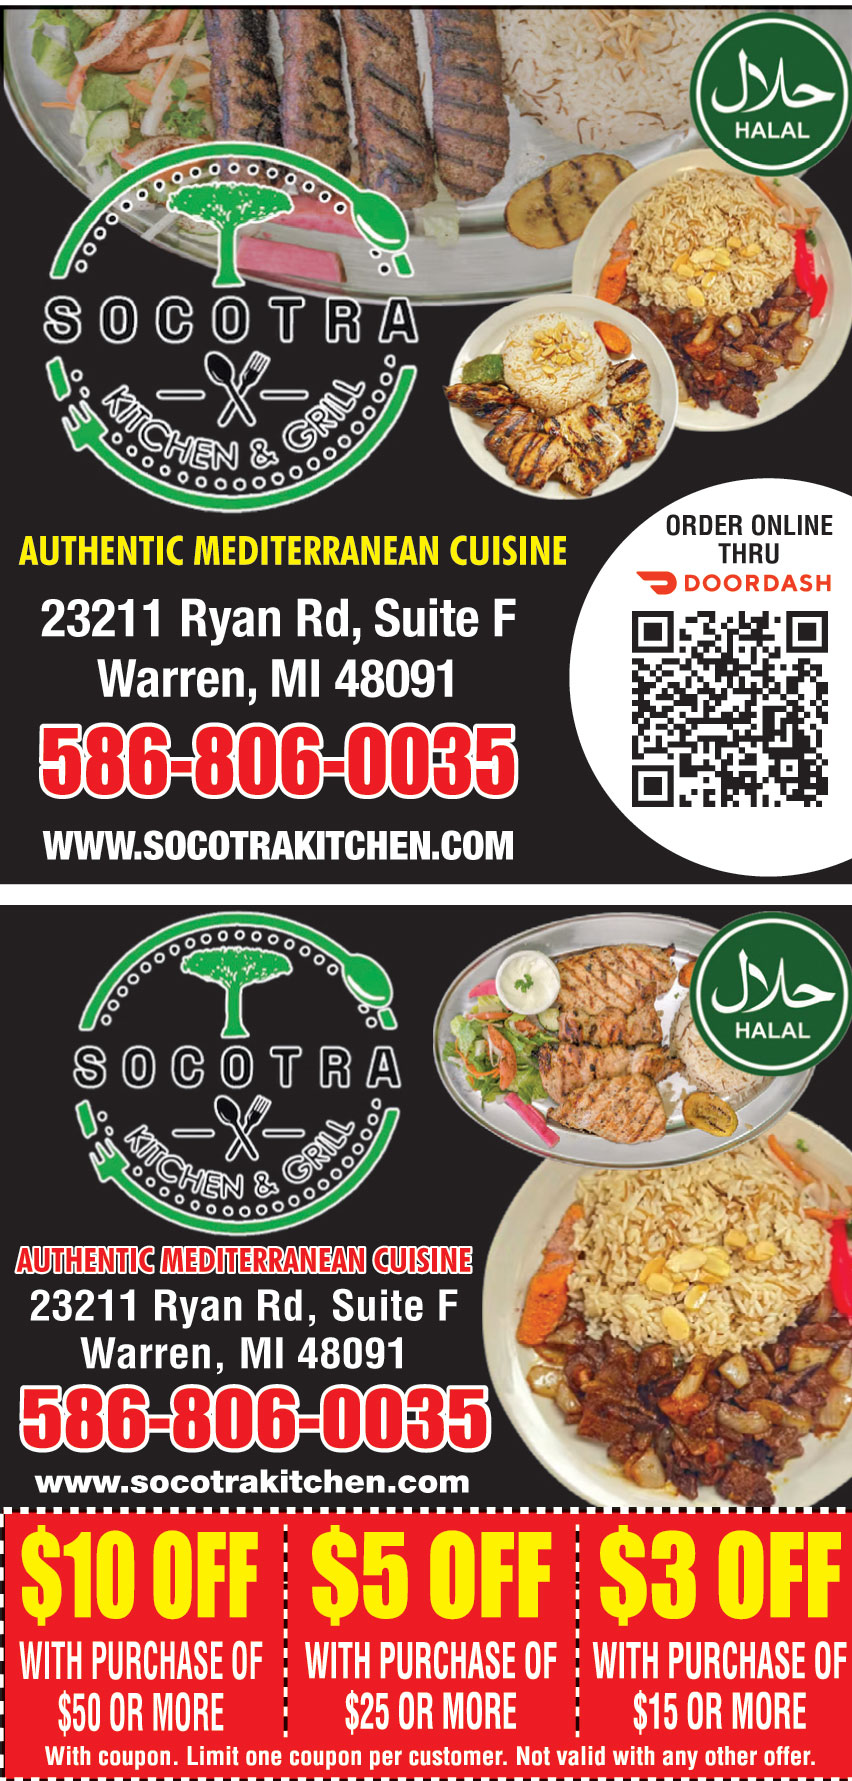 SOCOTRA KITCHEN AND GRILL